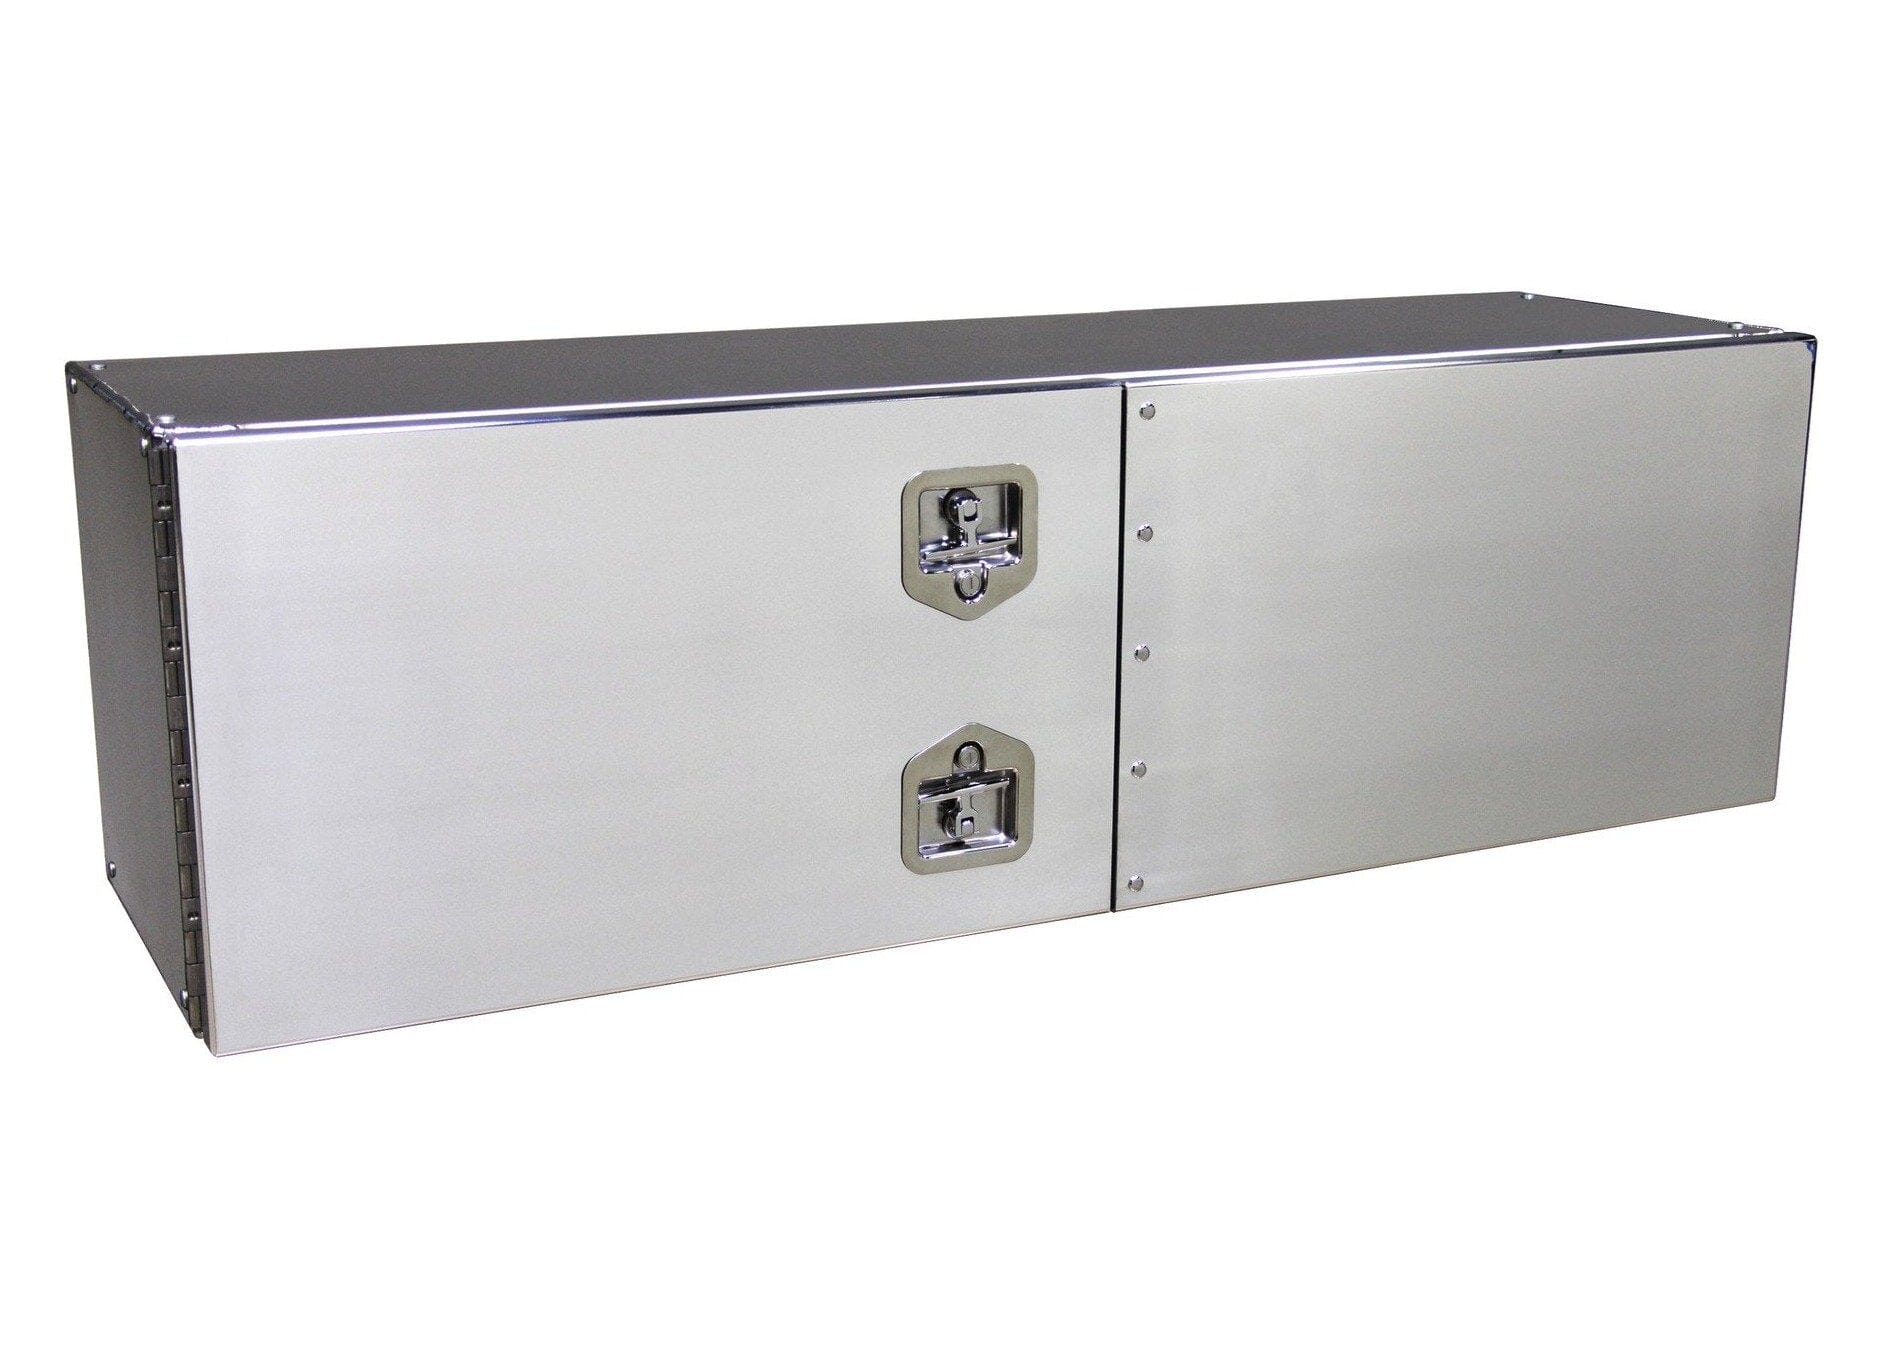 24 X 24 X 60 Inch Smooth Aluminum Tool Box With Lock Rod Latches & Double  Doors